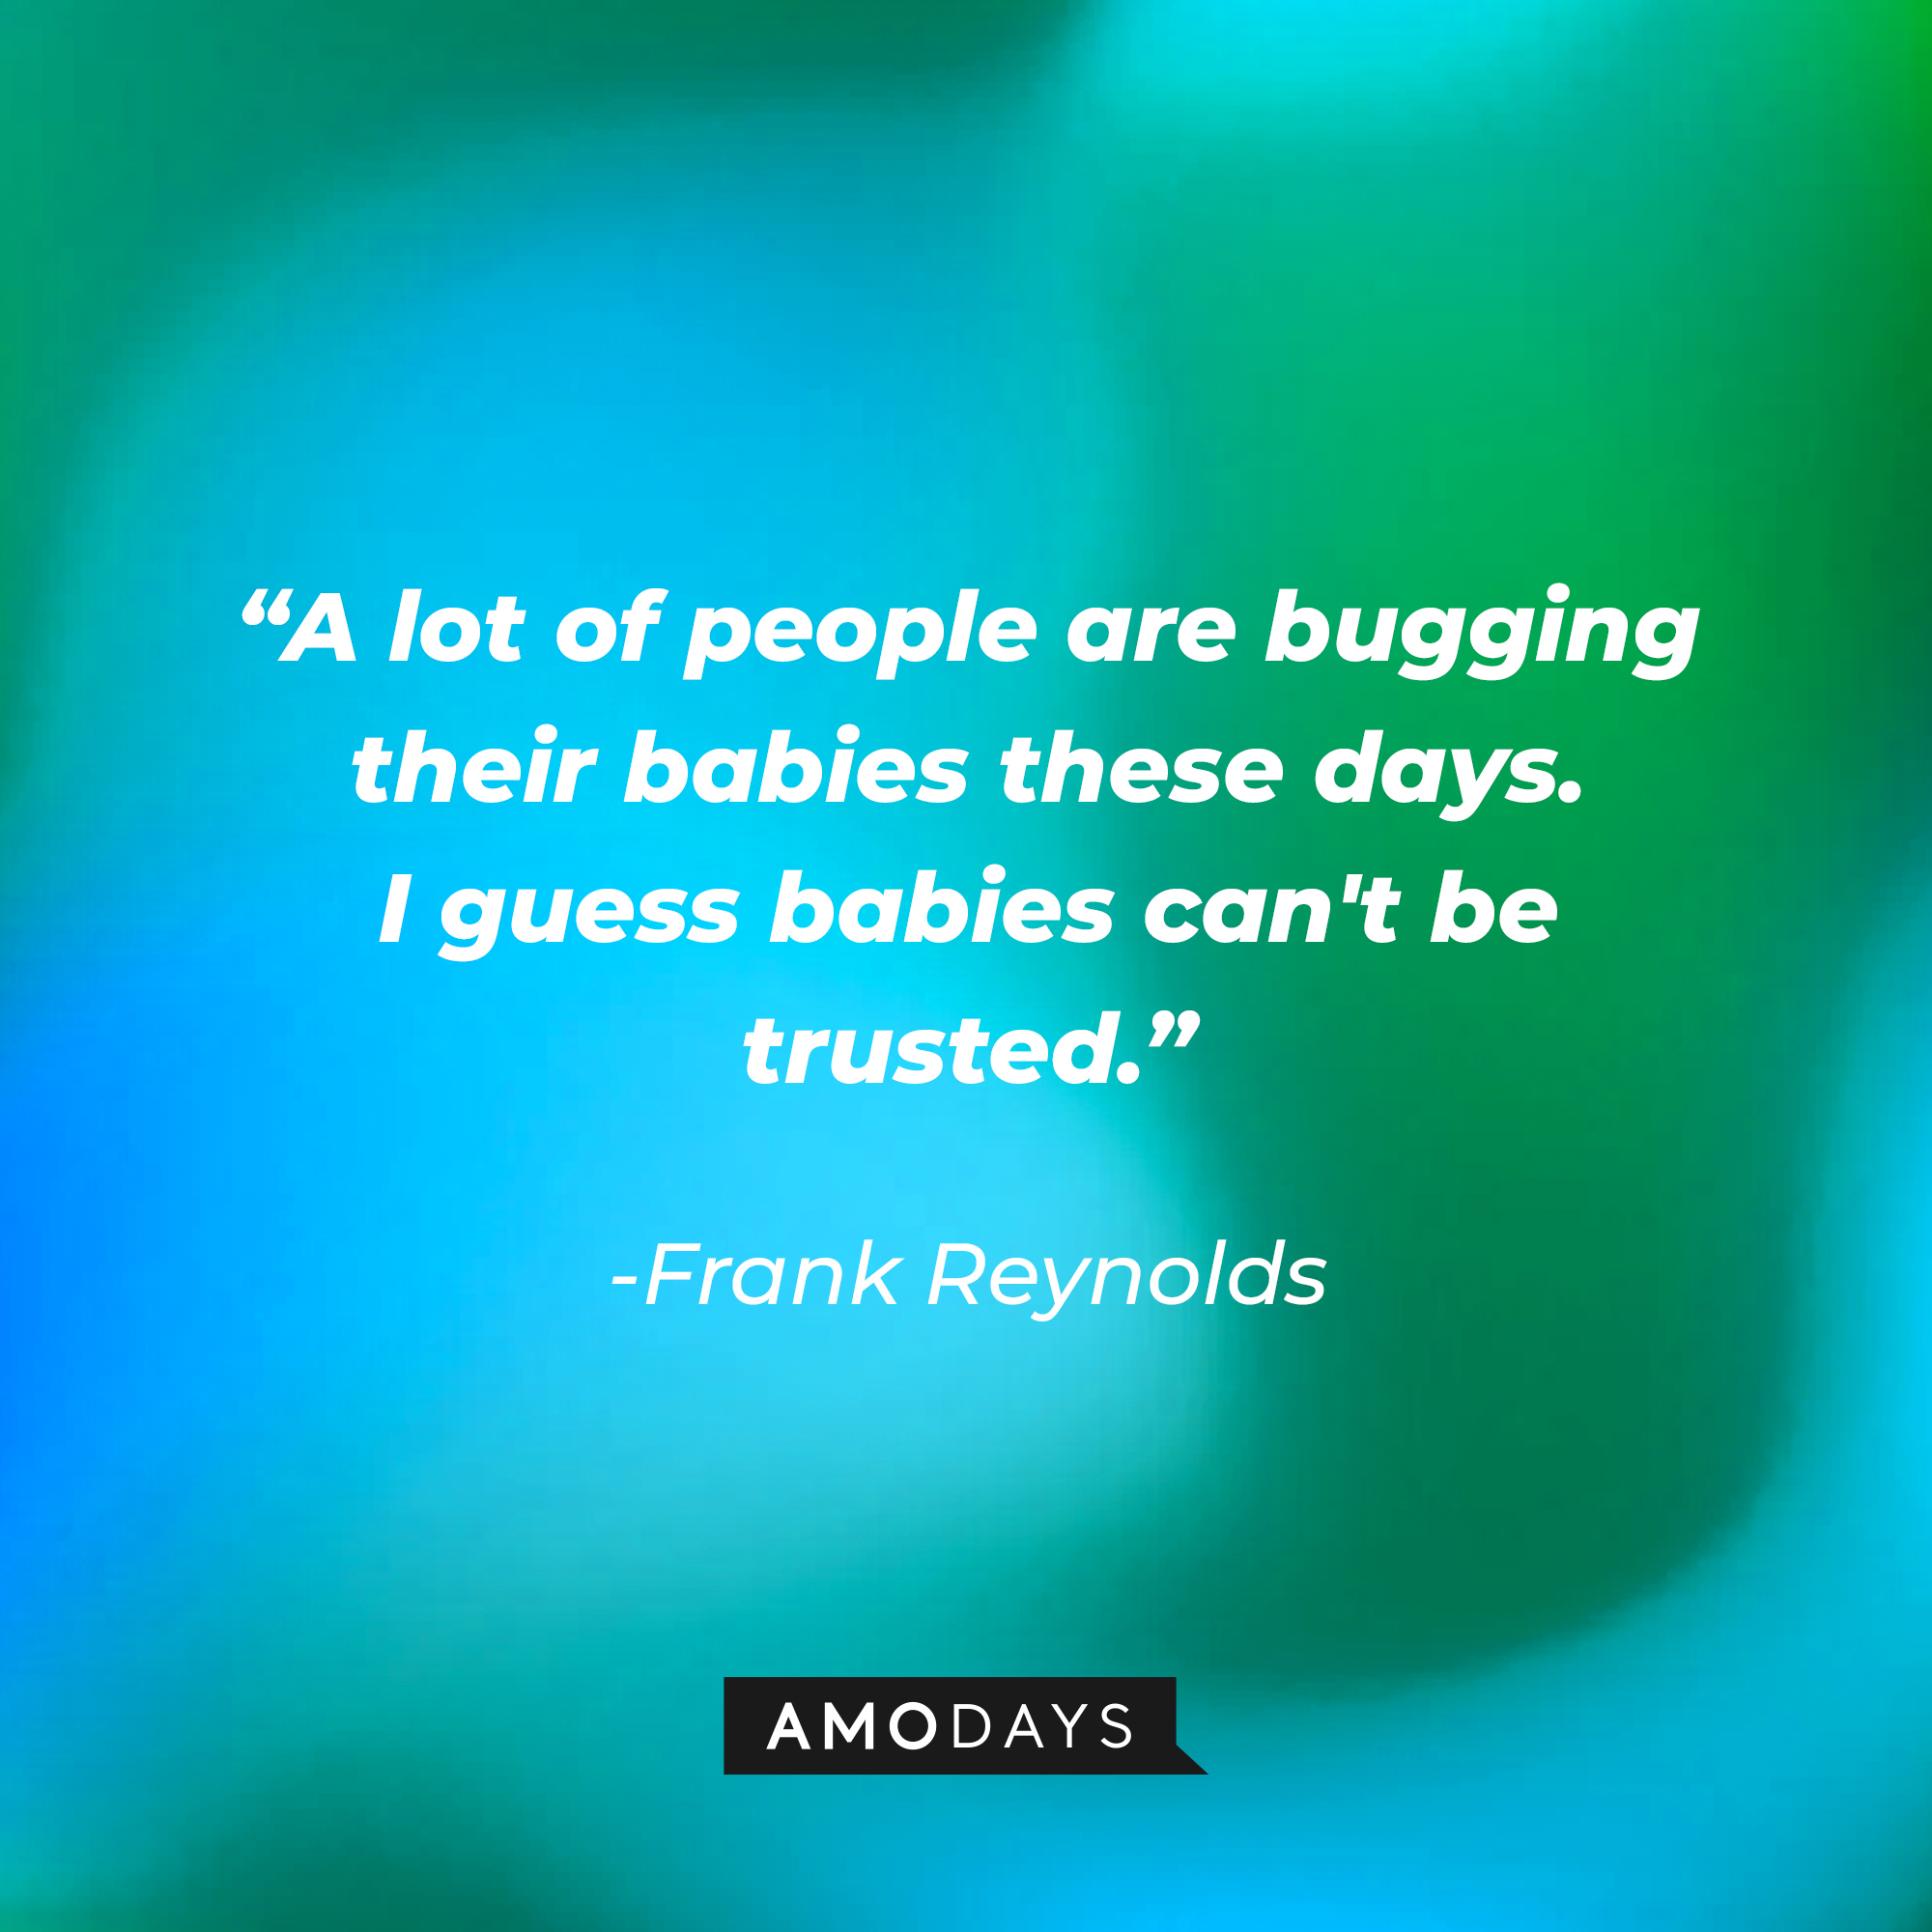 Frank Reynolds quote: “A lot of people are bugging their babies these days. I guess babies can't be trusted.” | Source: facebook.com/alwayssunny